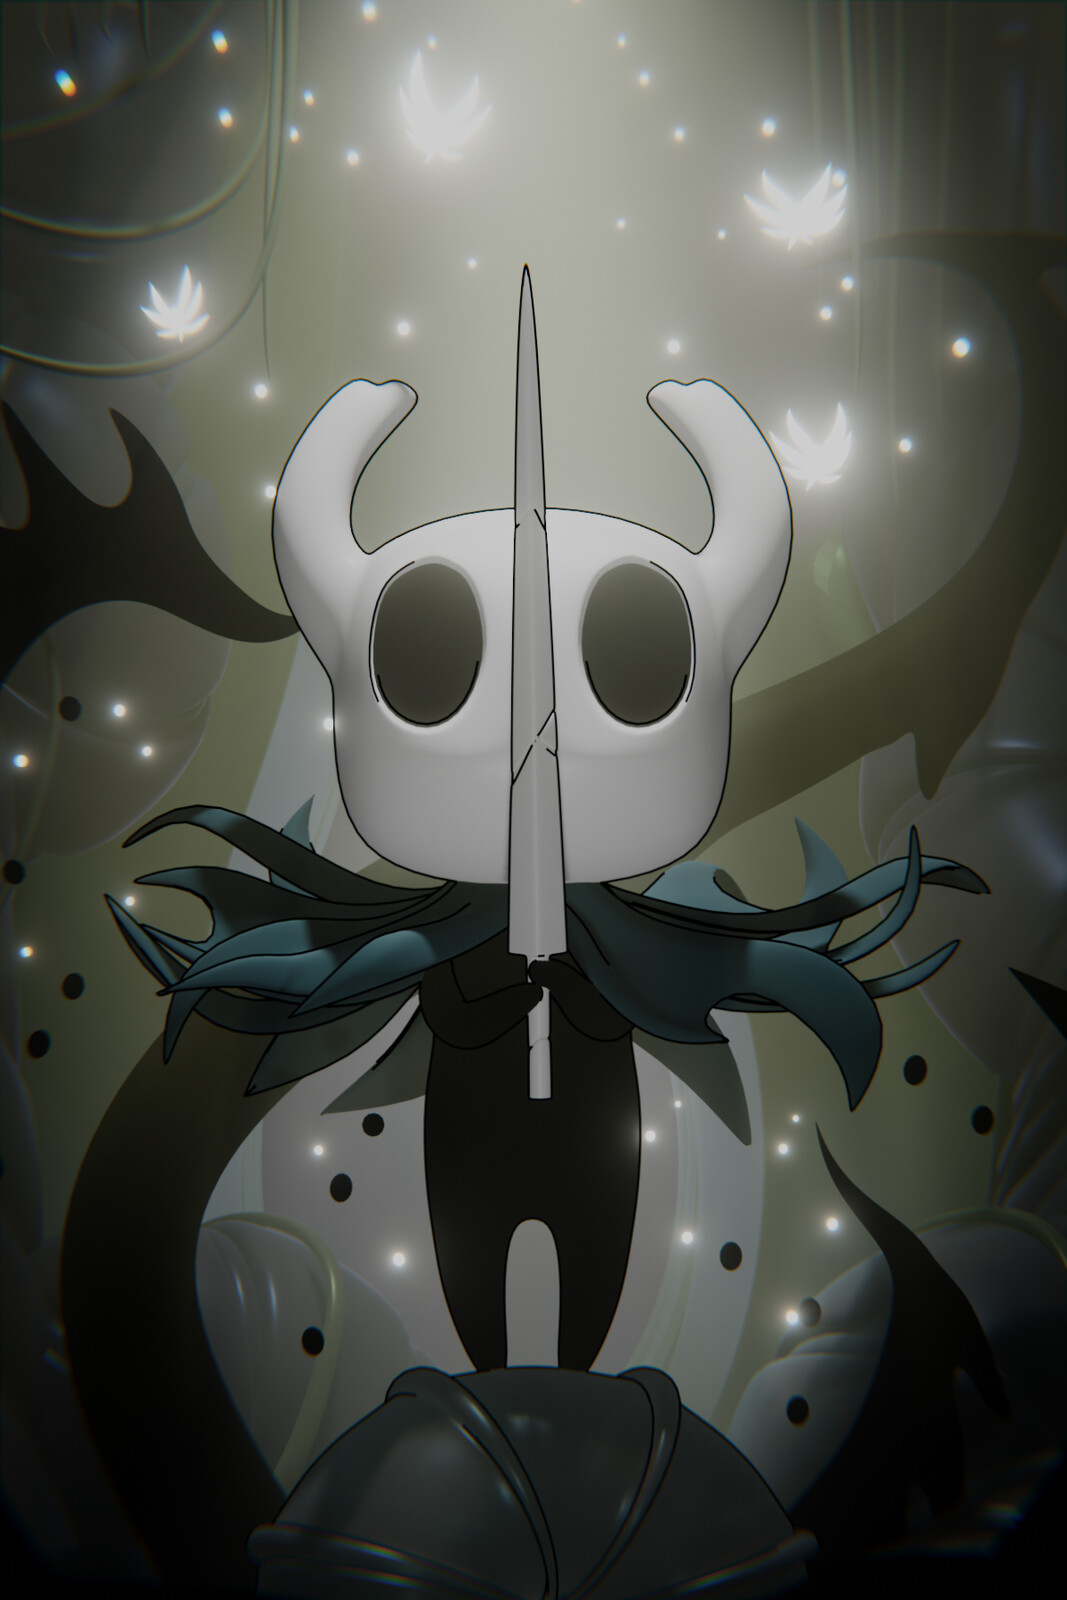 Hollow Knight remake in 3D